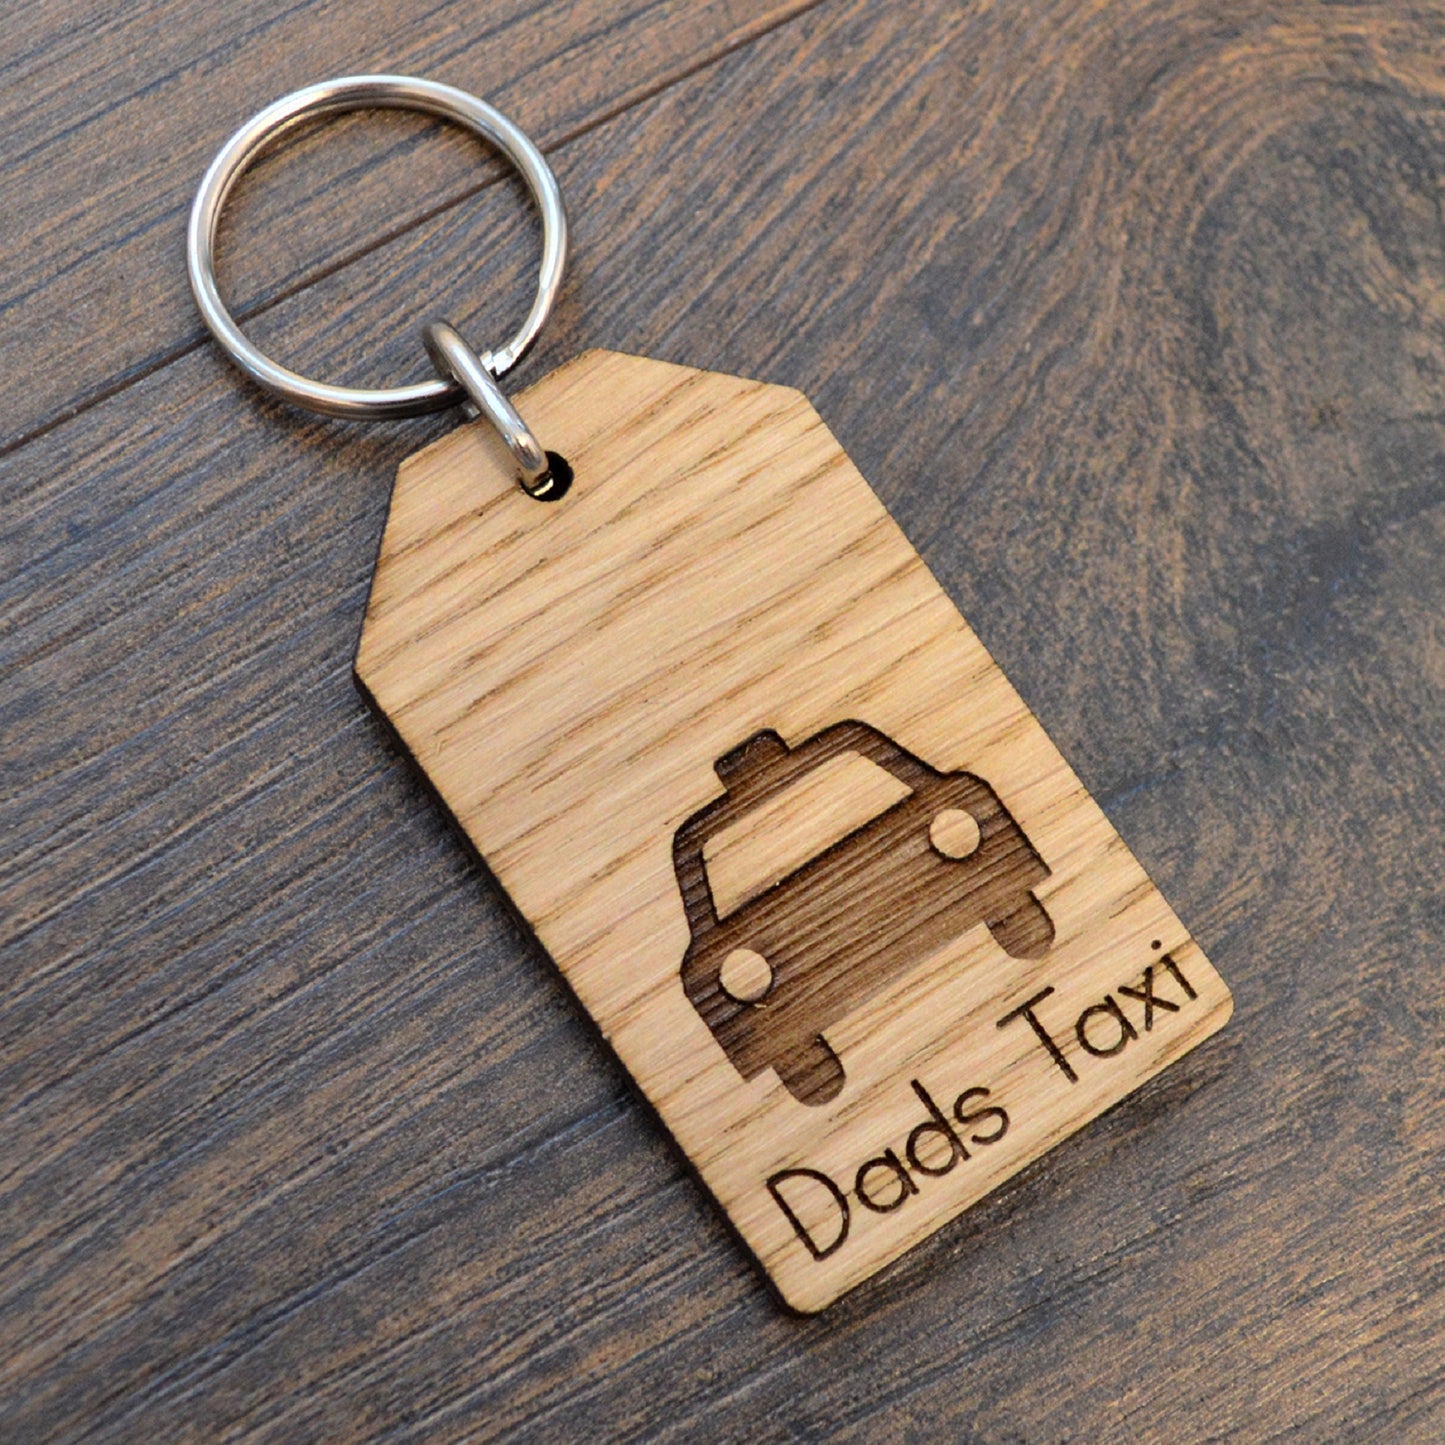 Dads Taxi - Engraved Wooden Keyring Gift For Dad - Funny Dad's Taxi Fathers Day Present